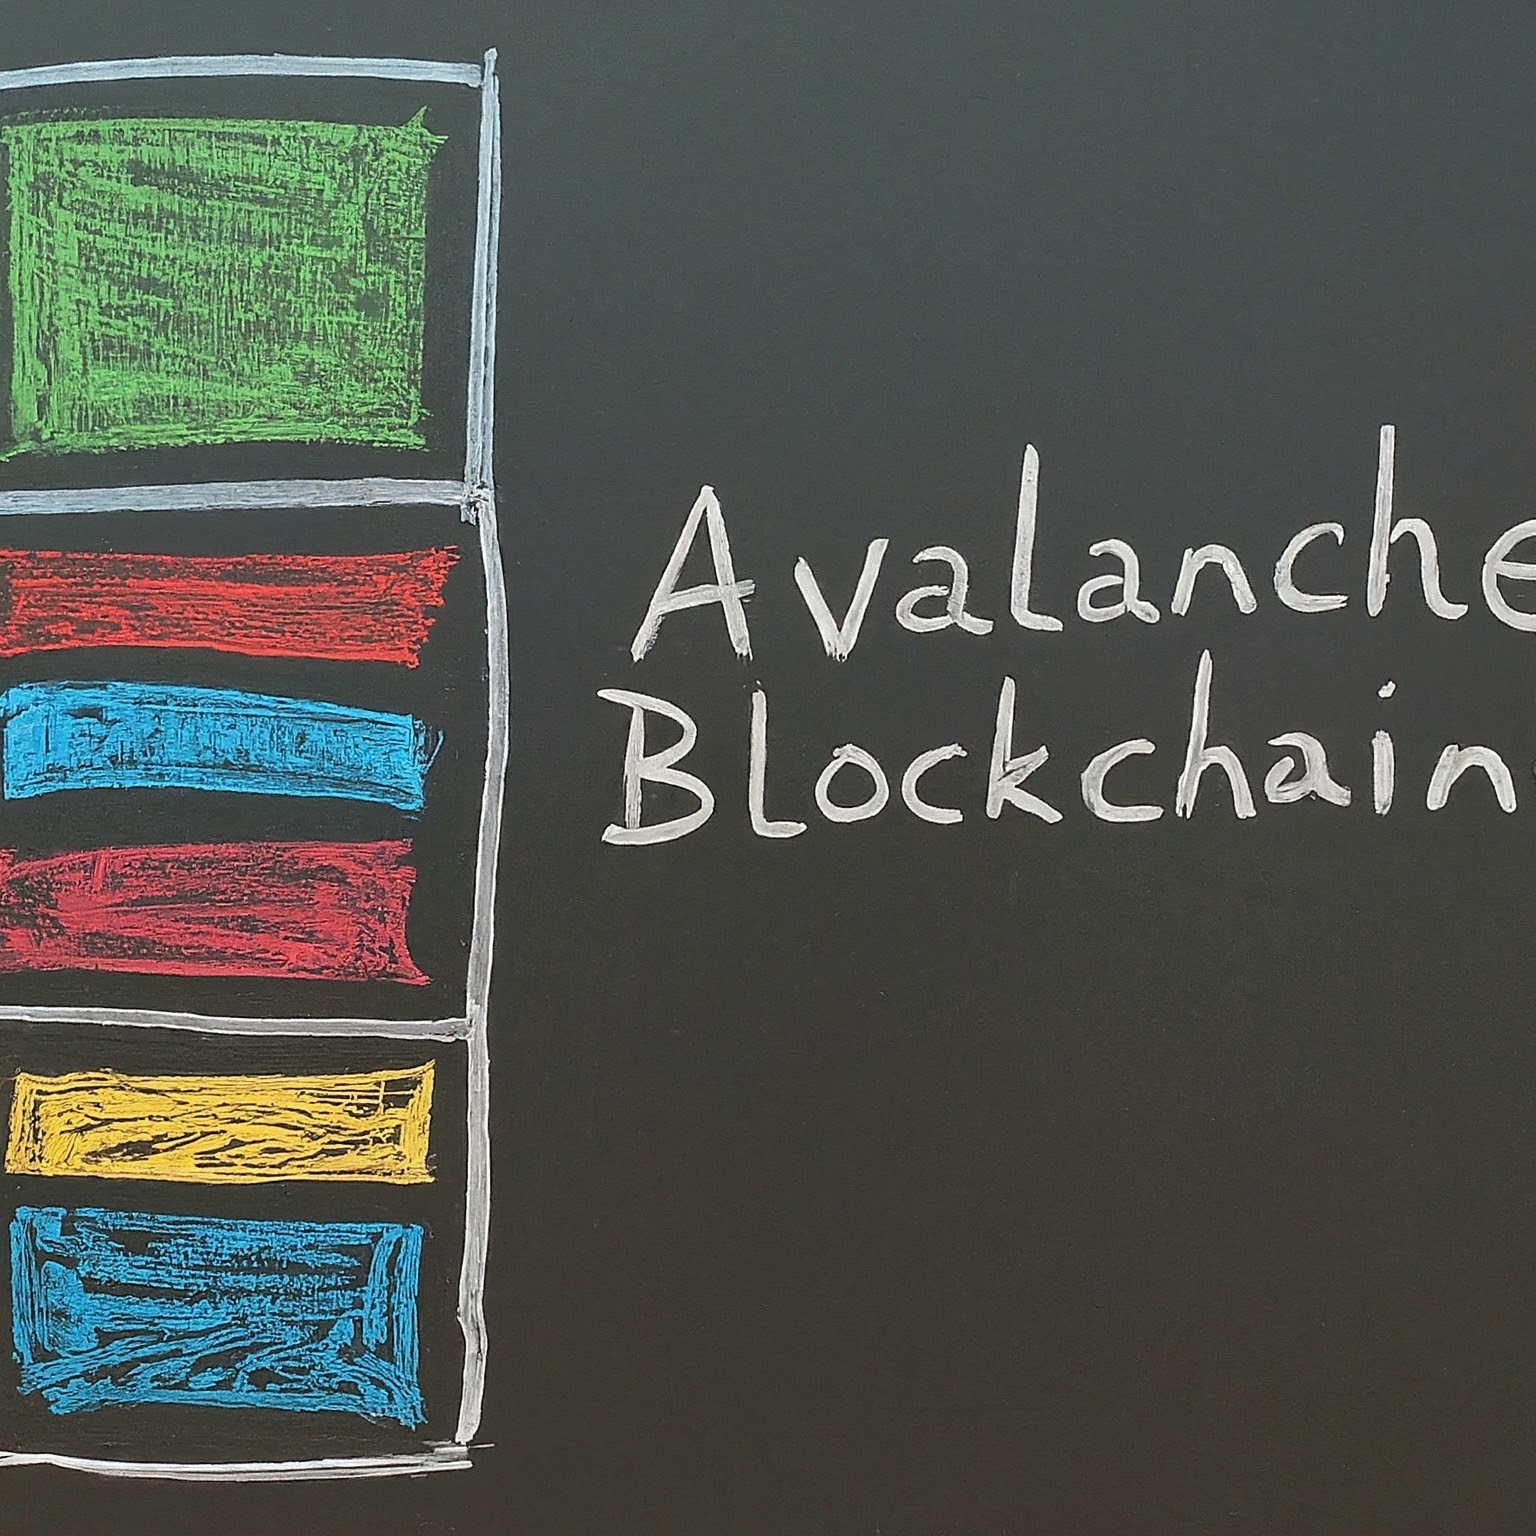 What is Avalanche Blockchain?